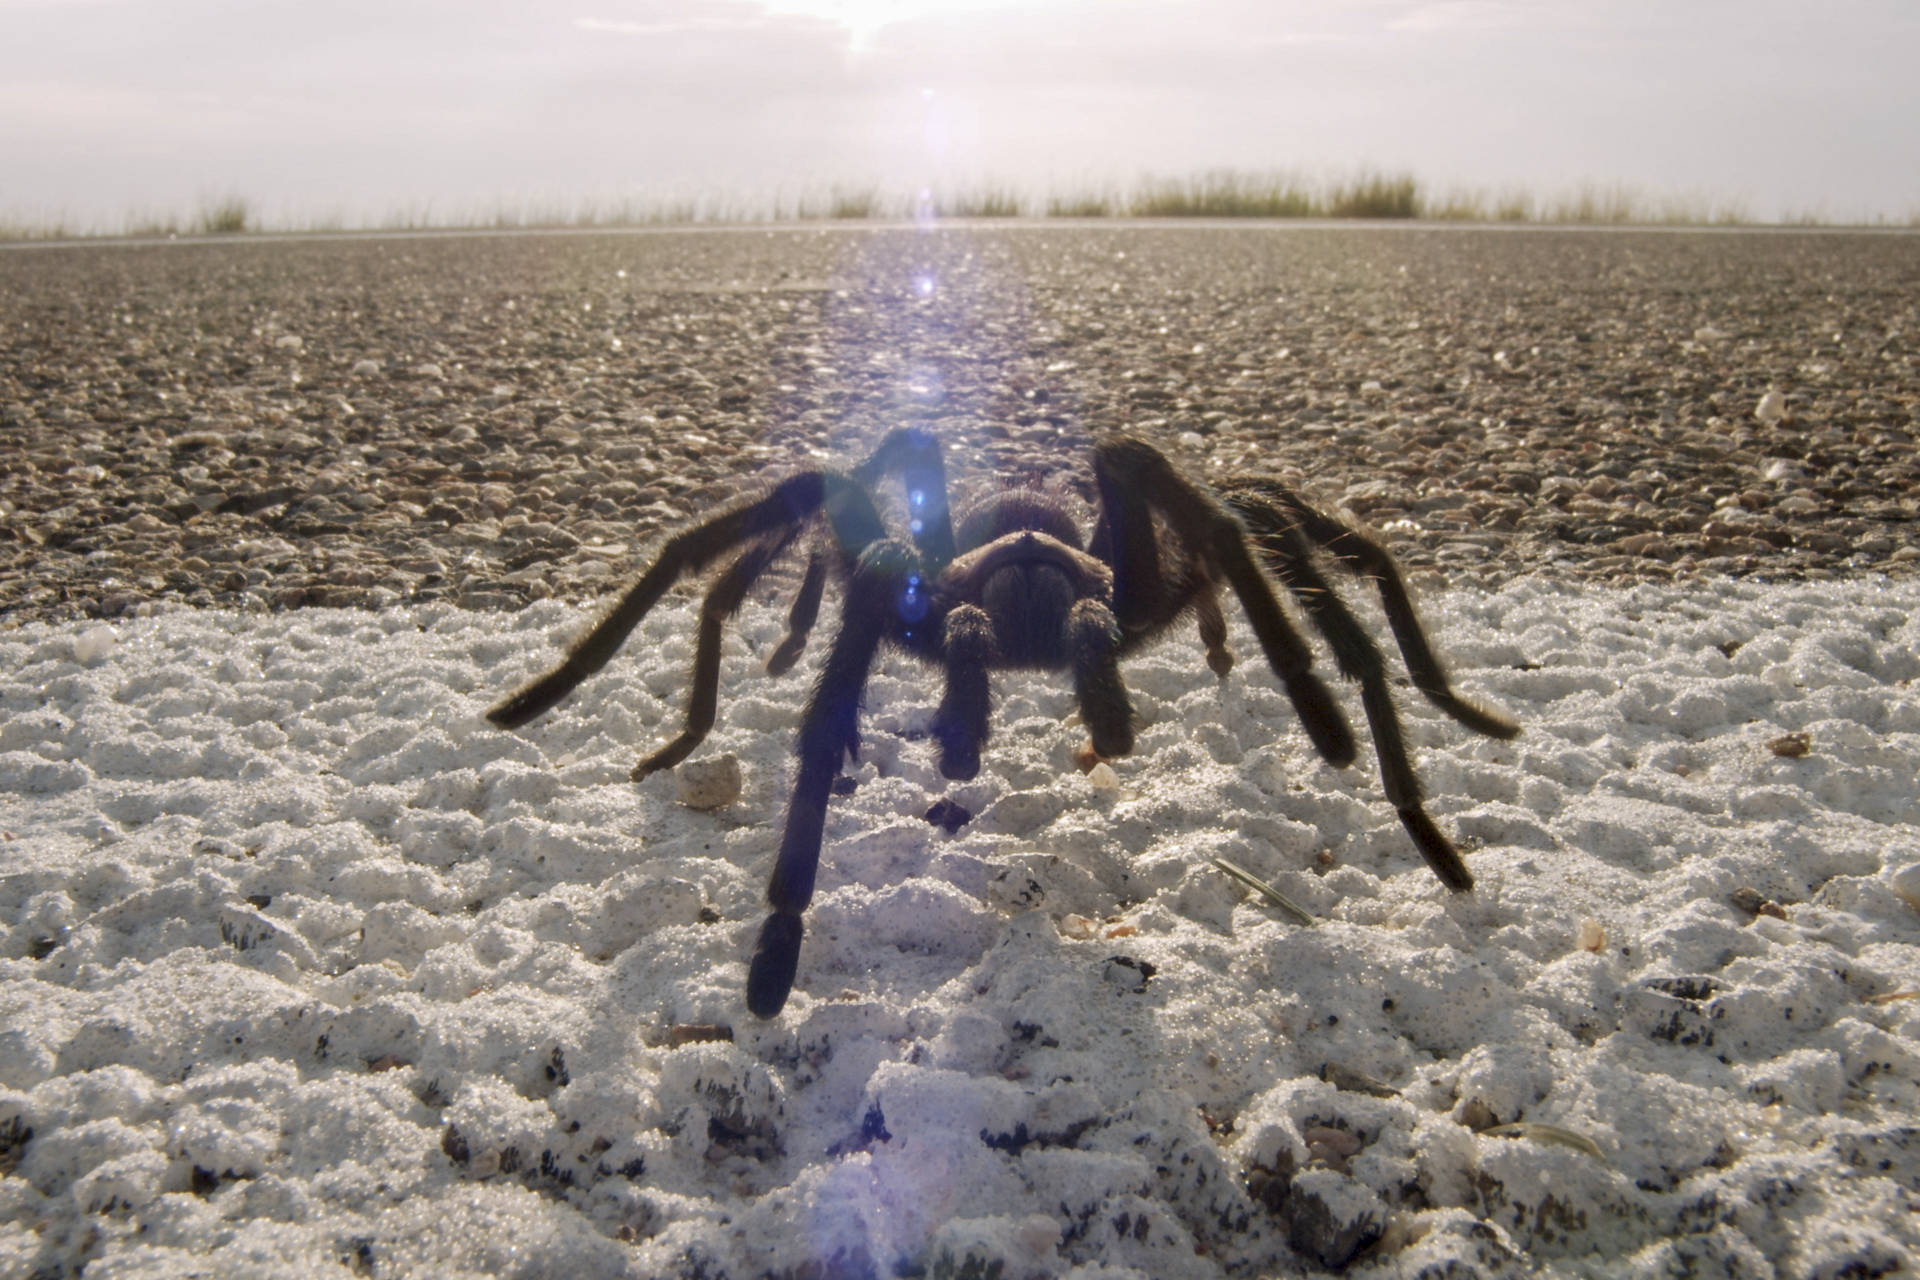 A Large furry spider on a road.